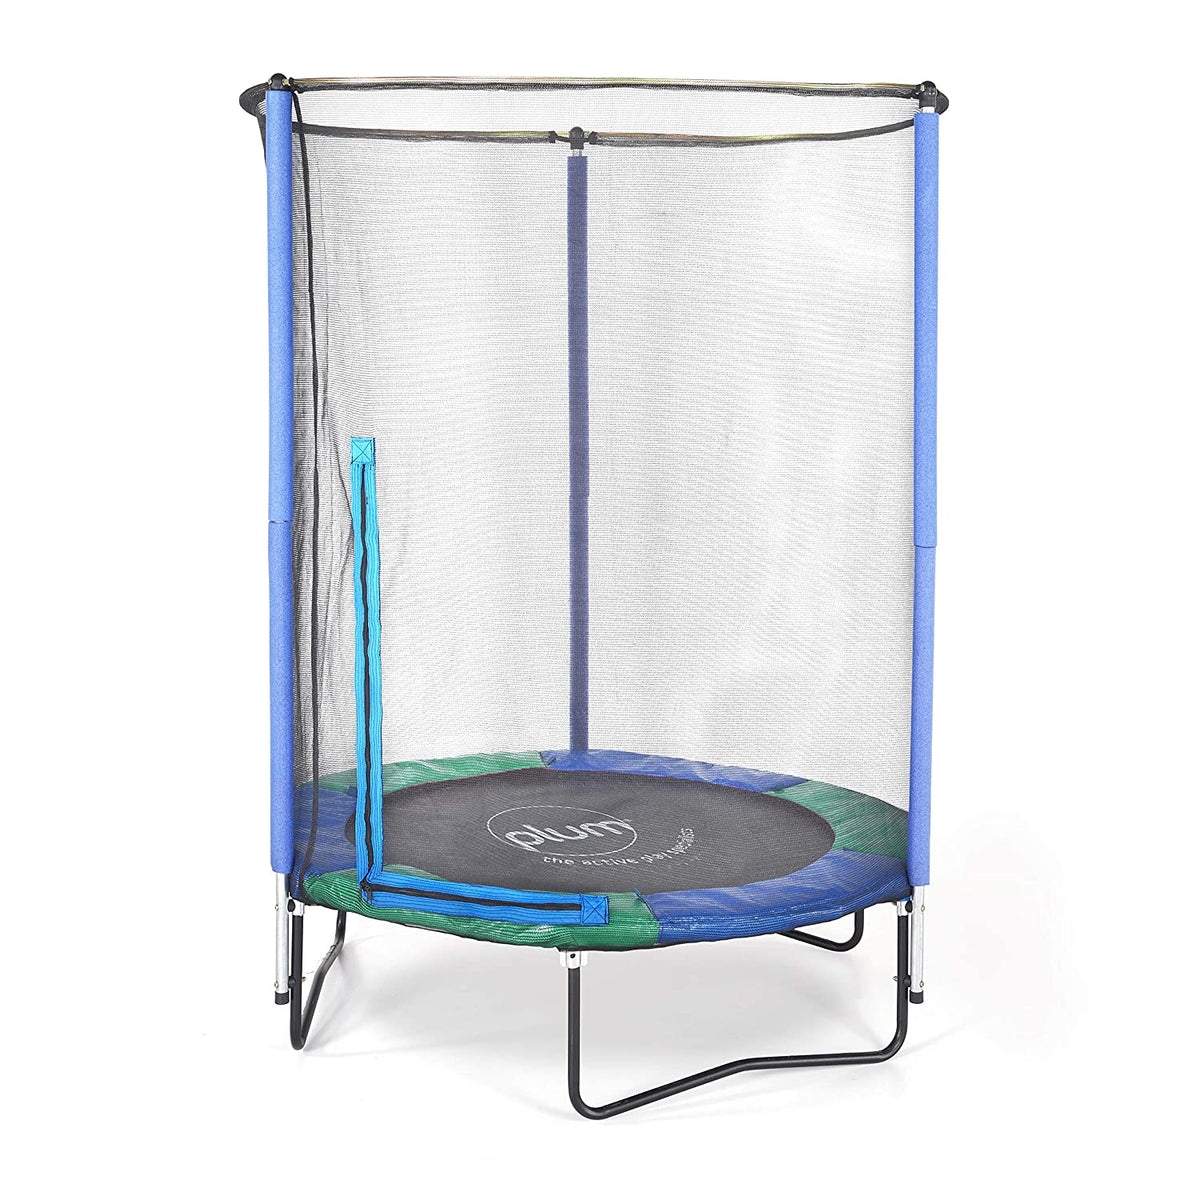 Plum 4.5ft Junior Trampoline and Enclosure with Safety Net - Indoor & Outdoor Trampoline for Ages 3-6 Years